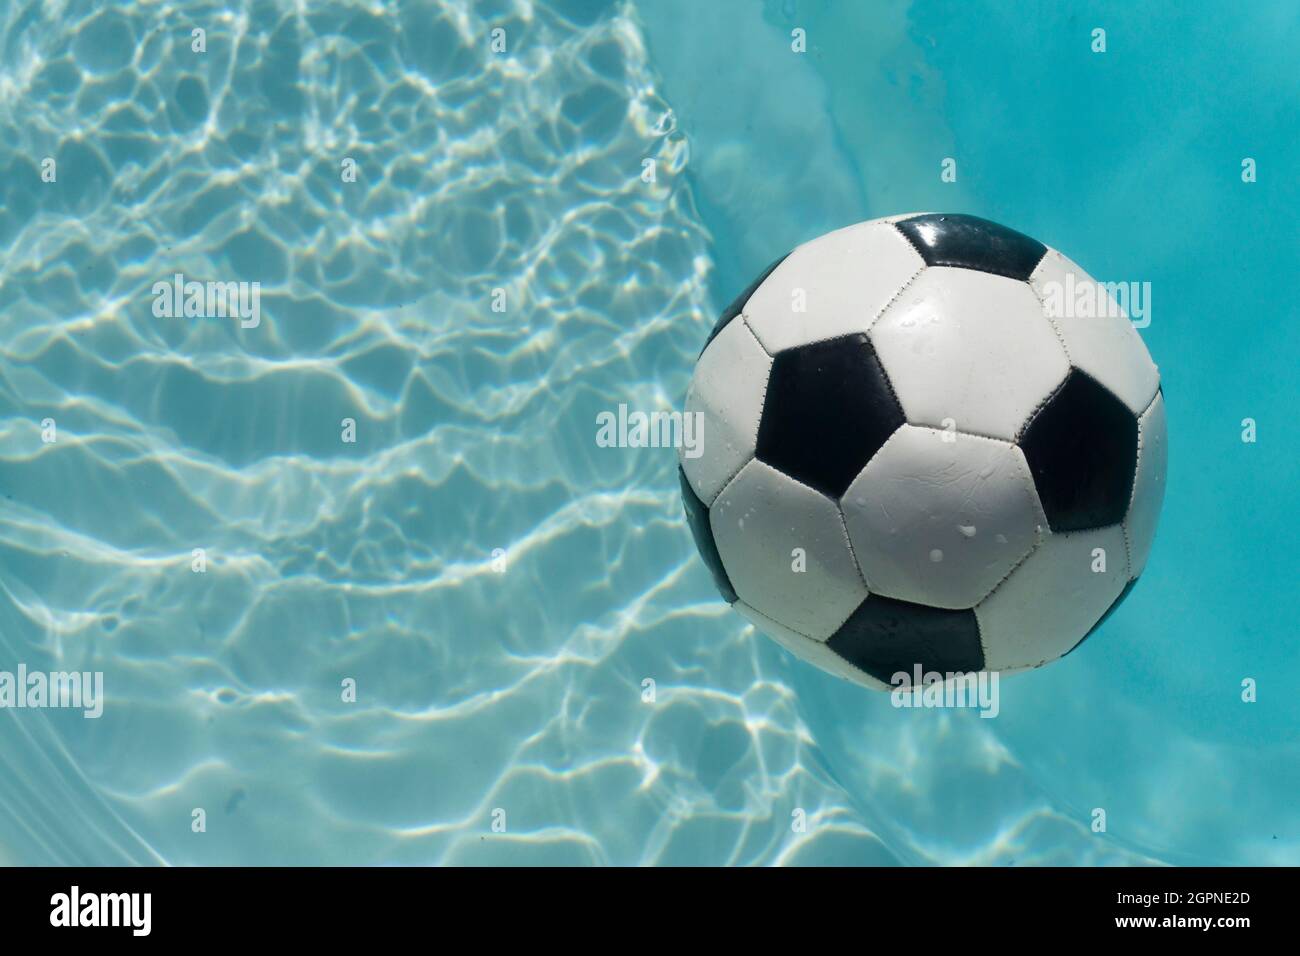 Black and white soccer football floating in a blue clear swimming pool. Summer sport background Stock Photo